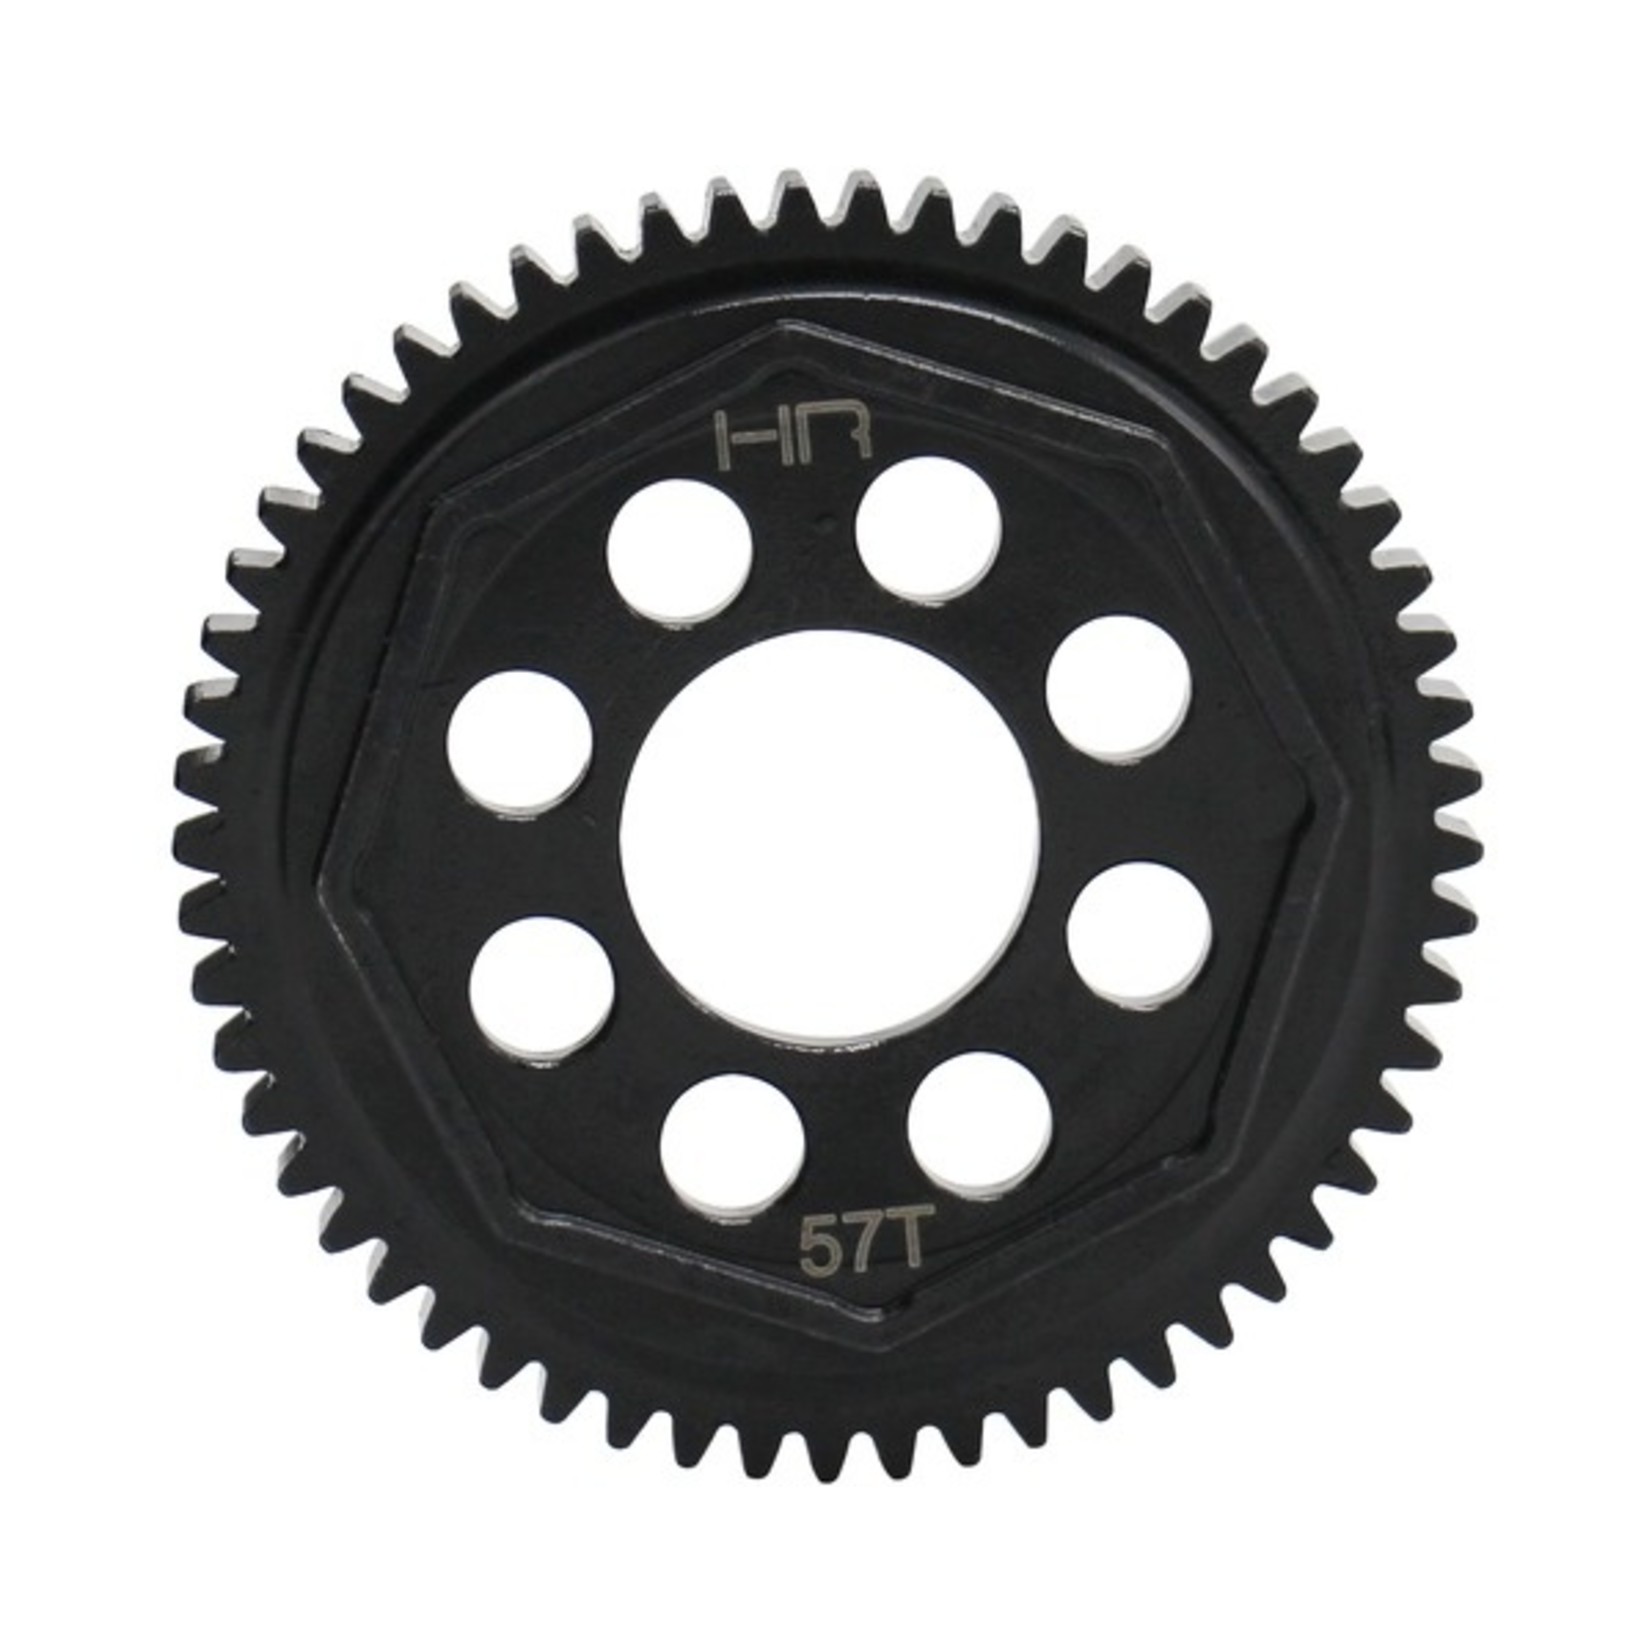 Hot Racing SATF257 Steel Spur Gear, 57 Tooth/0.8 Mod, for Arrma BLX